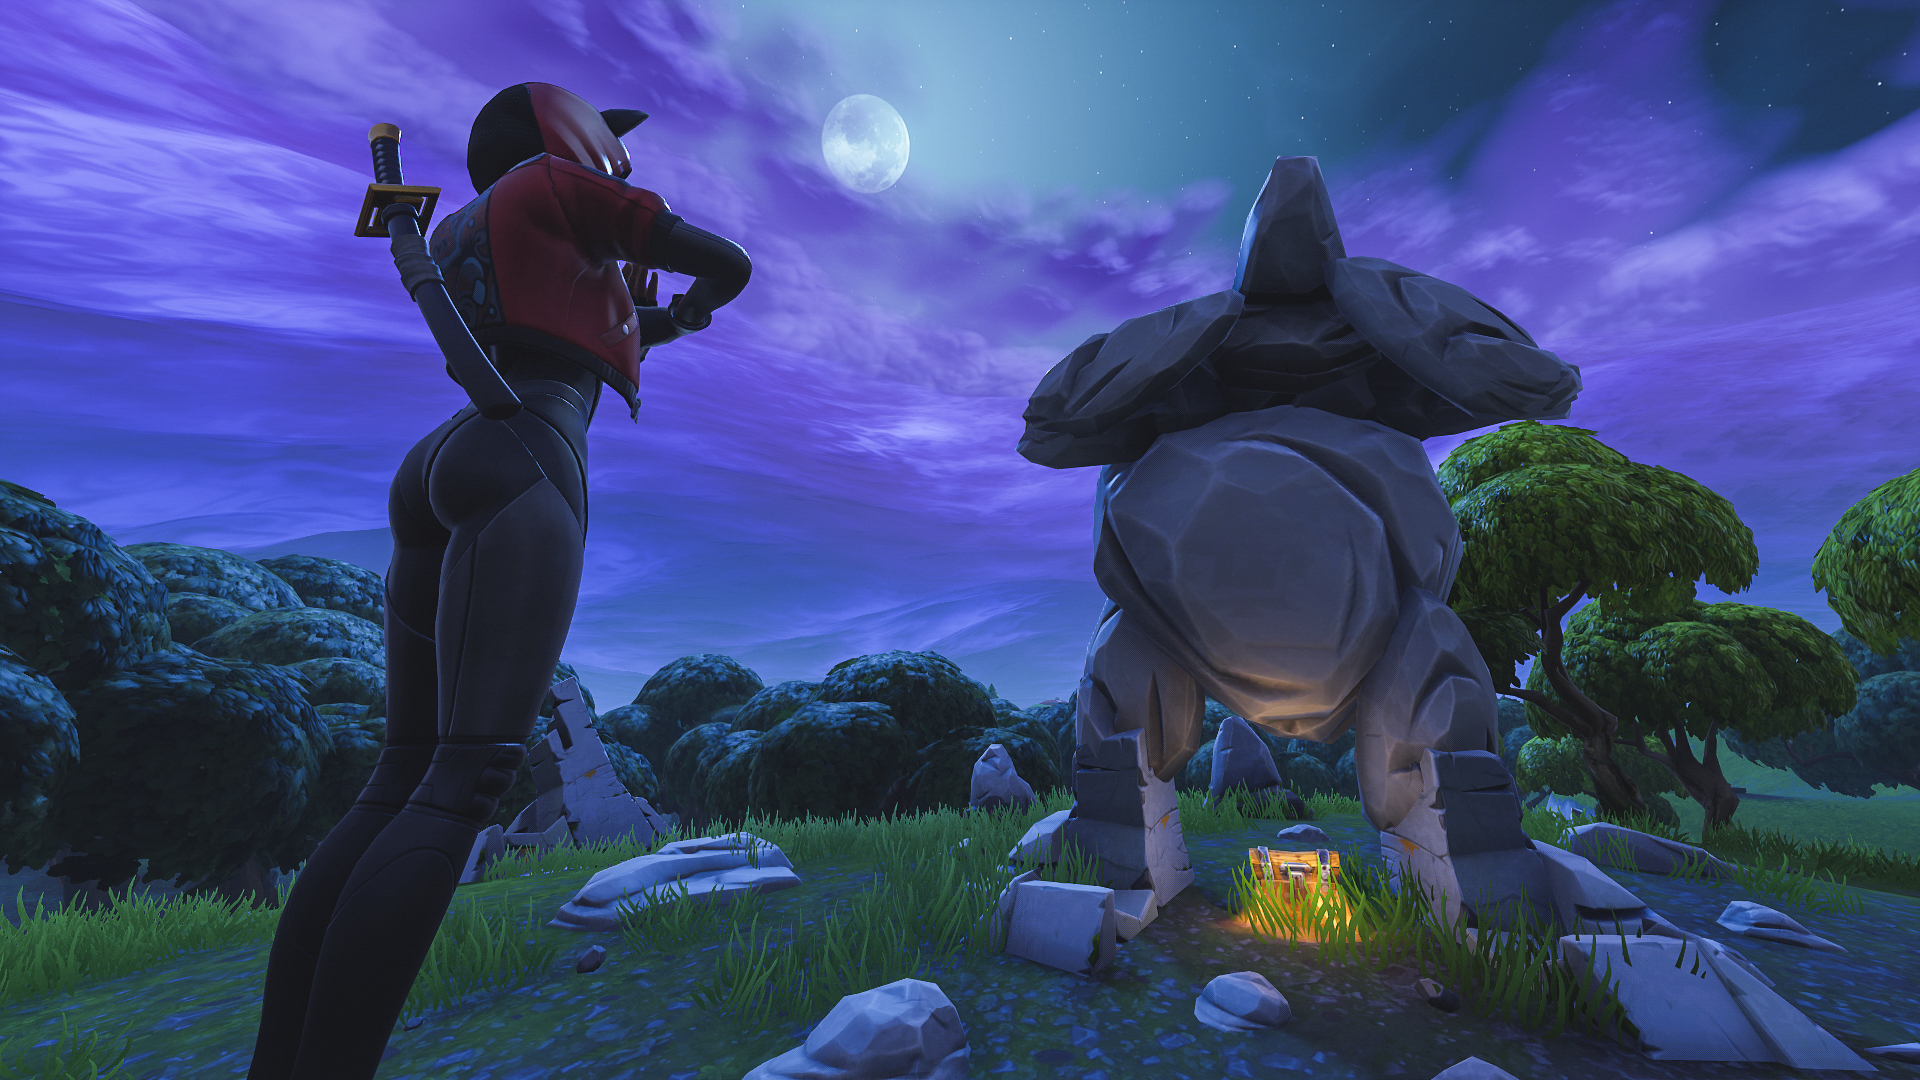 Luna Teams Up with Epic Games for Exclusive Fortnite Reward